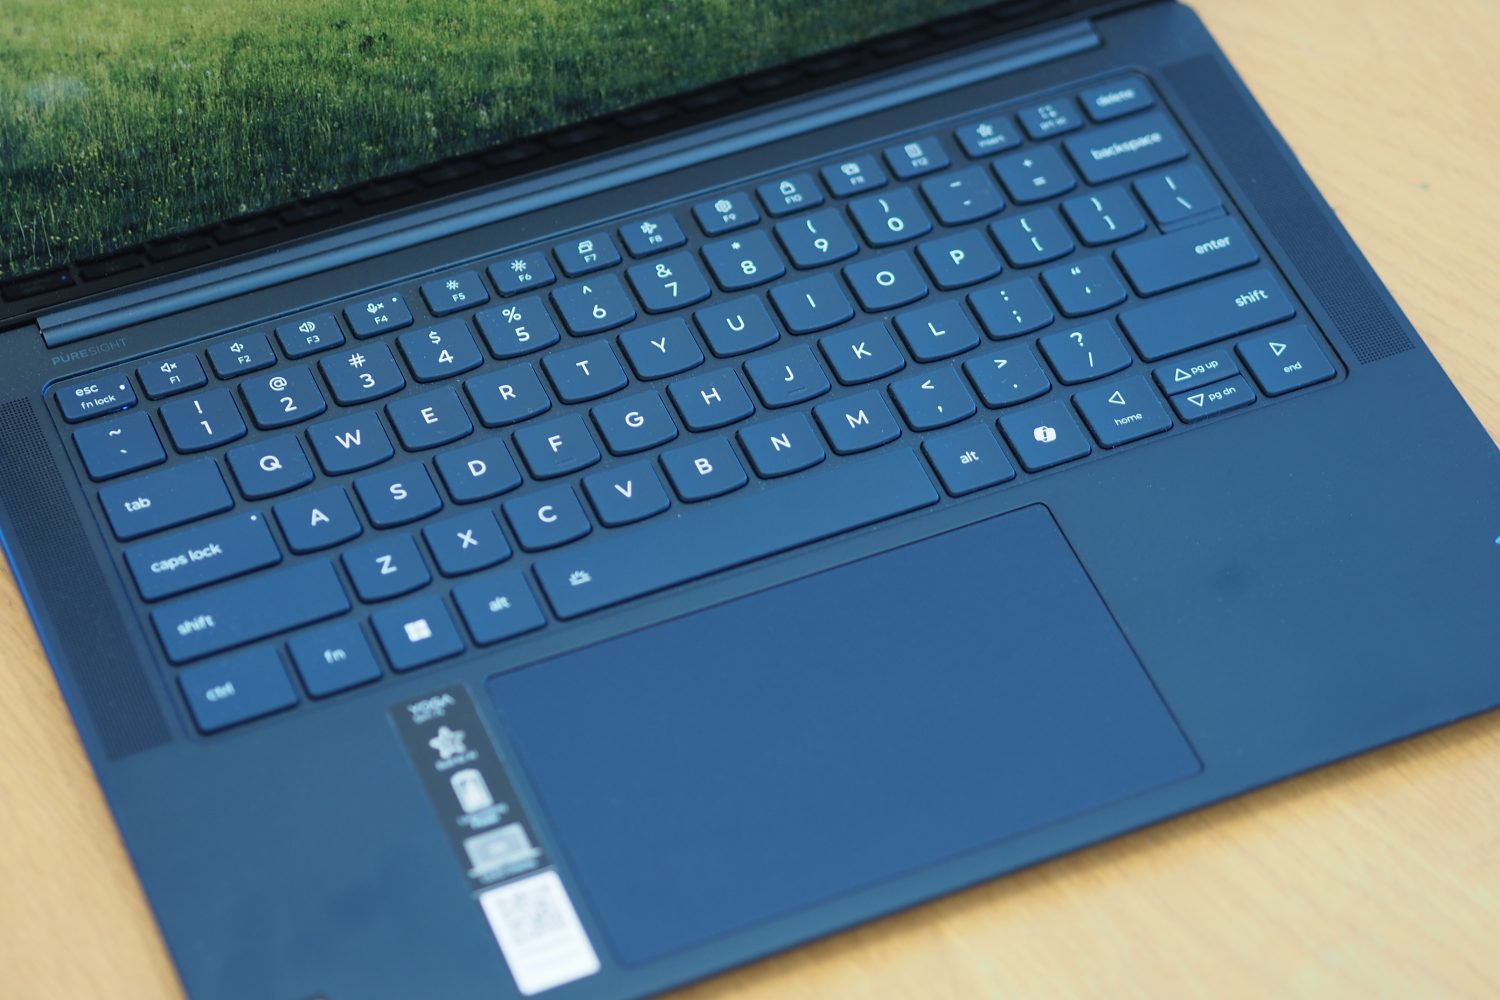 Lenovo Yoga Slim 7x top down view showing keyboard and touchpad.